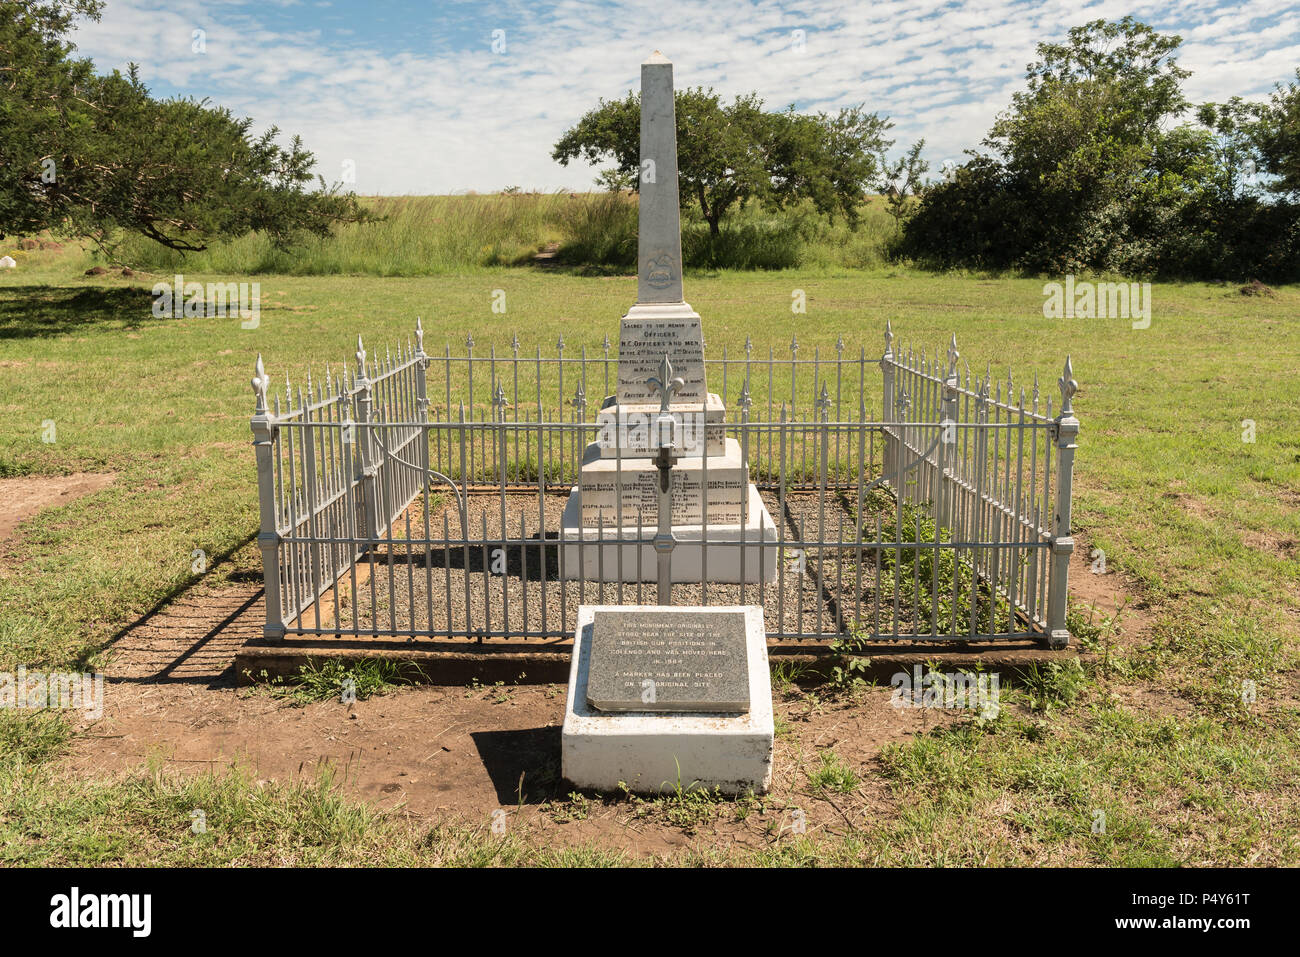 COLENSO, SOUTH AFRICA - MARCH 21, 2018: A plaque and a monument at the Clouston Garden of Rememberance for soldiers killed in the battle of Colenso du Stock Photo